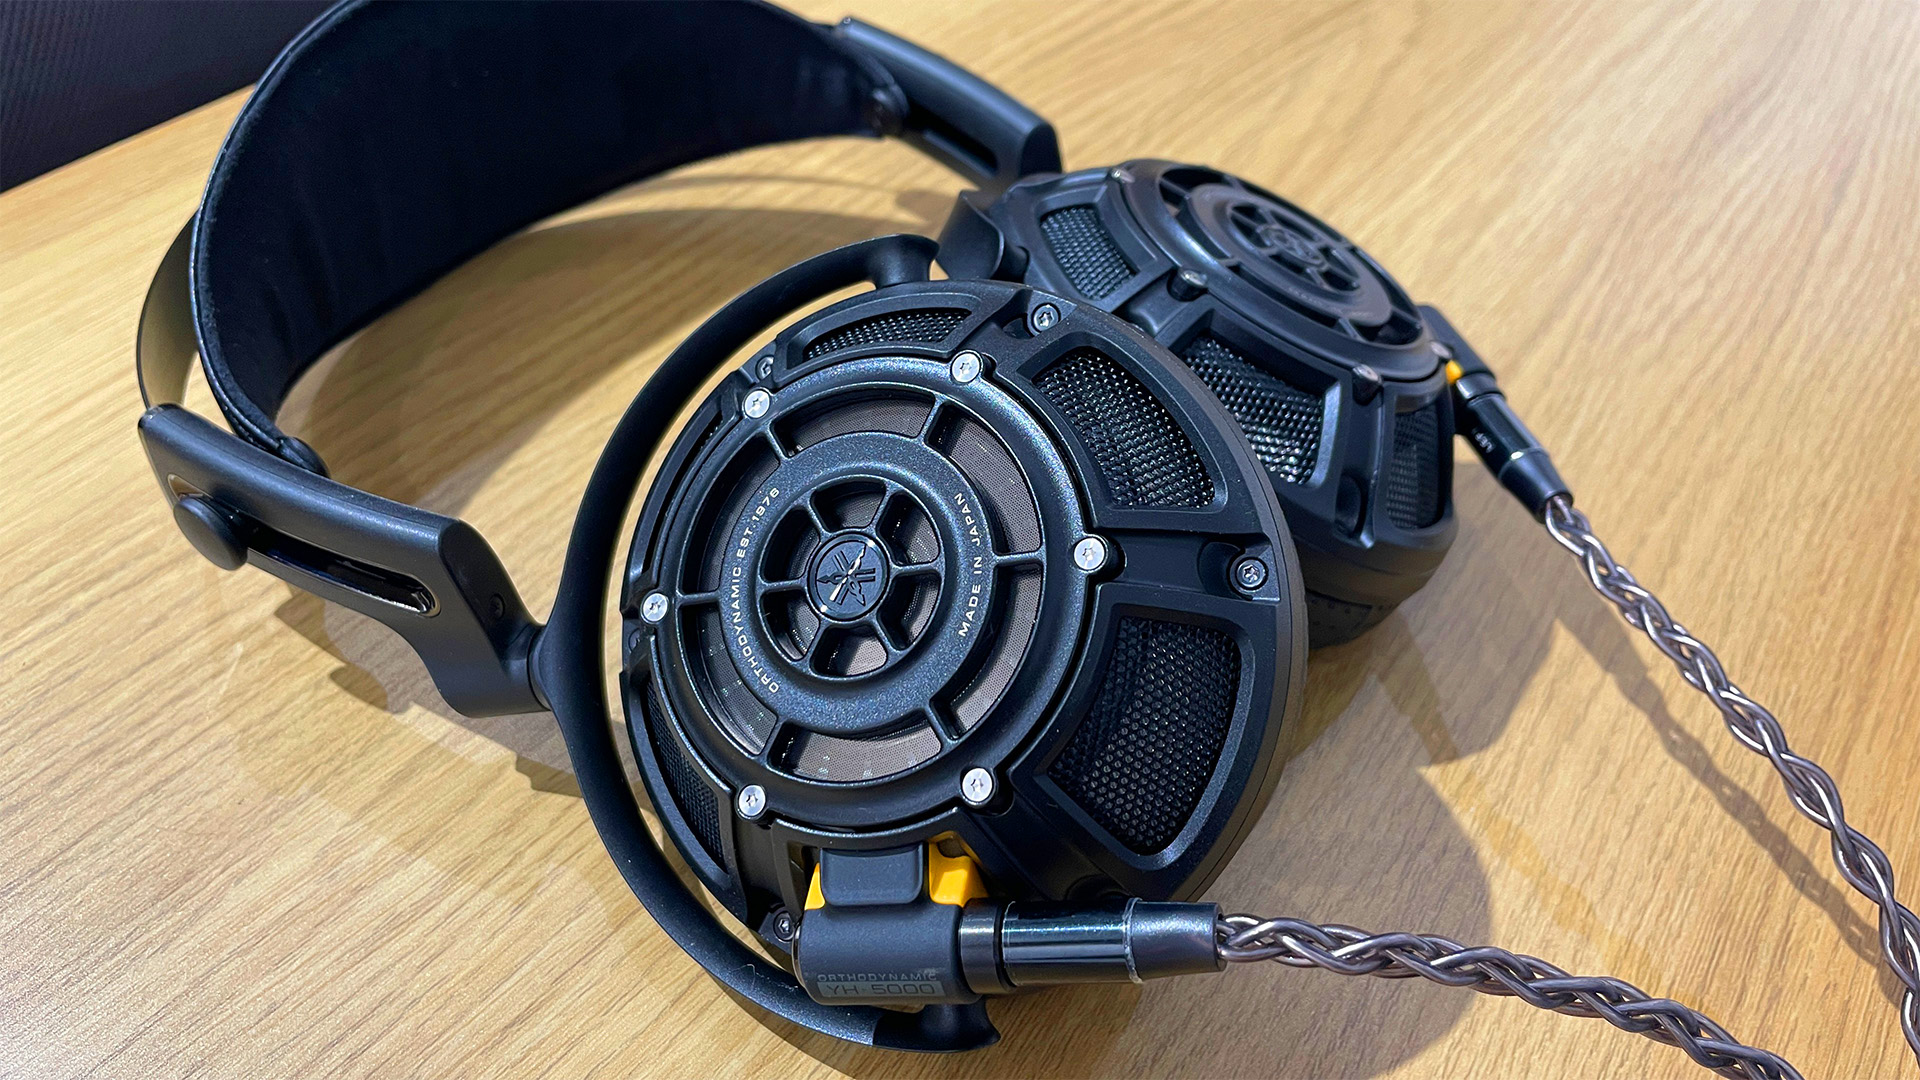 Open-back vs closed-back headphones: Which is best for gaming?